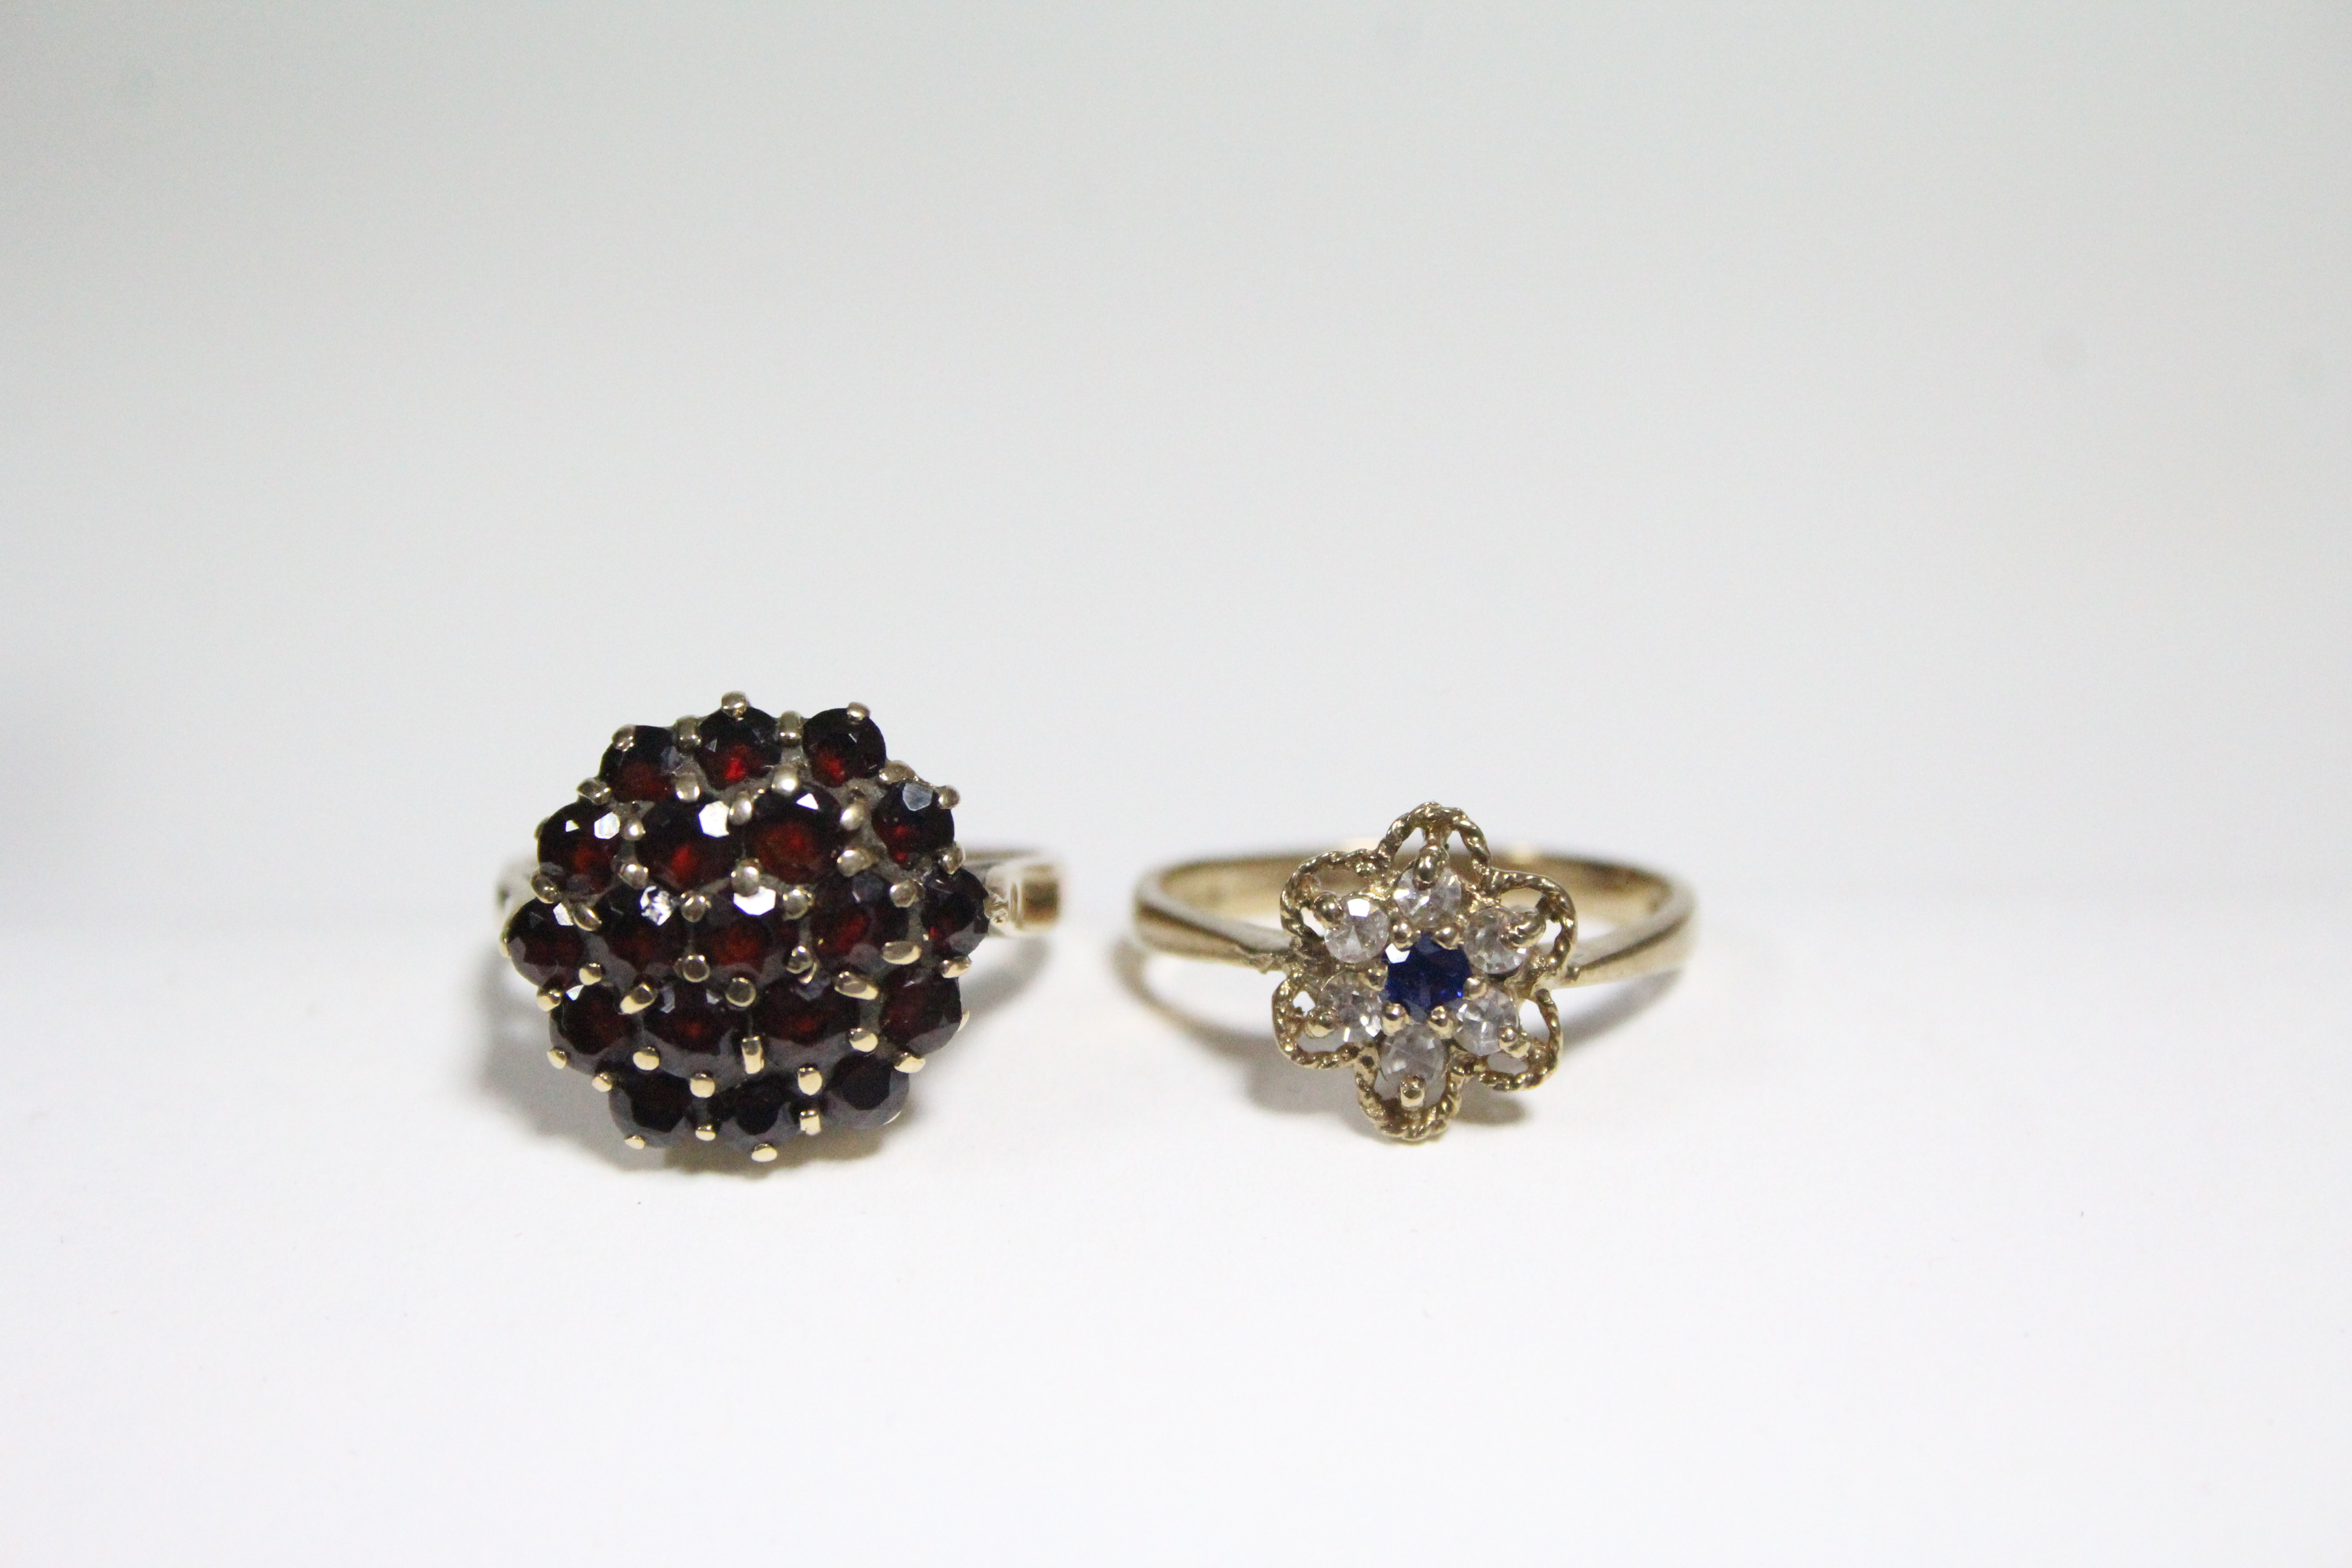 A 9ct. gold ring set cluster of blue & white sapphires; a gold ring set garnet cluster; & a pair